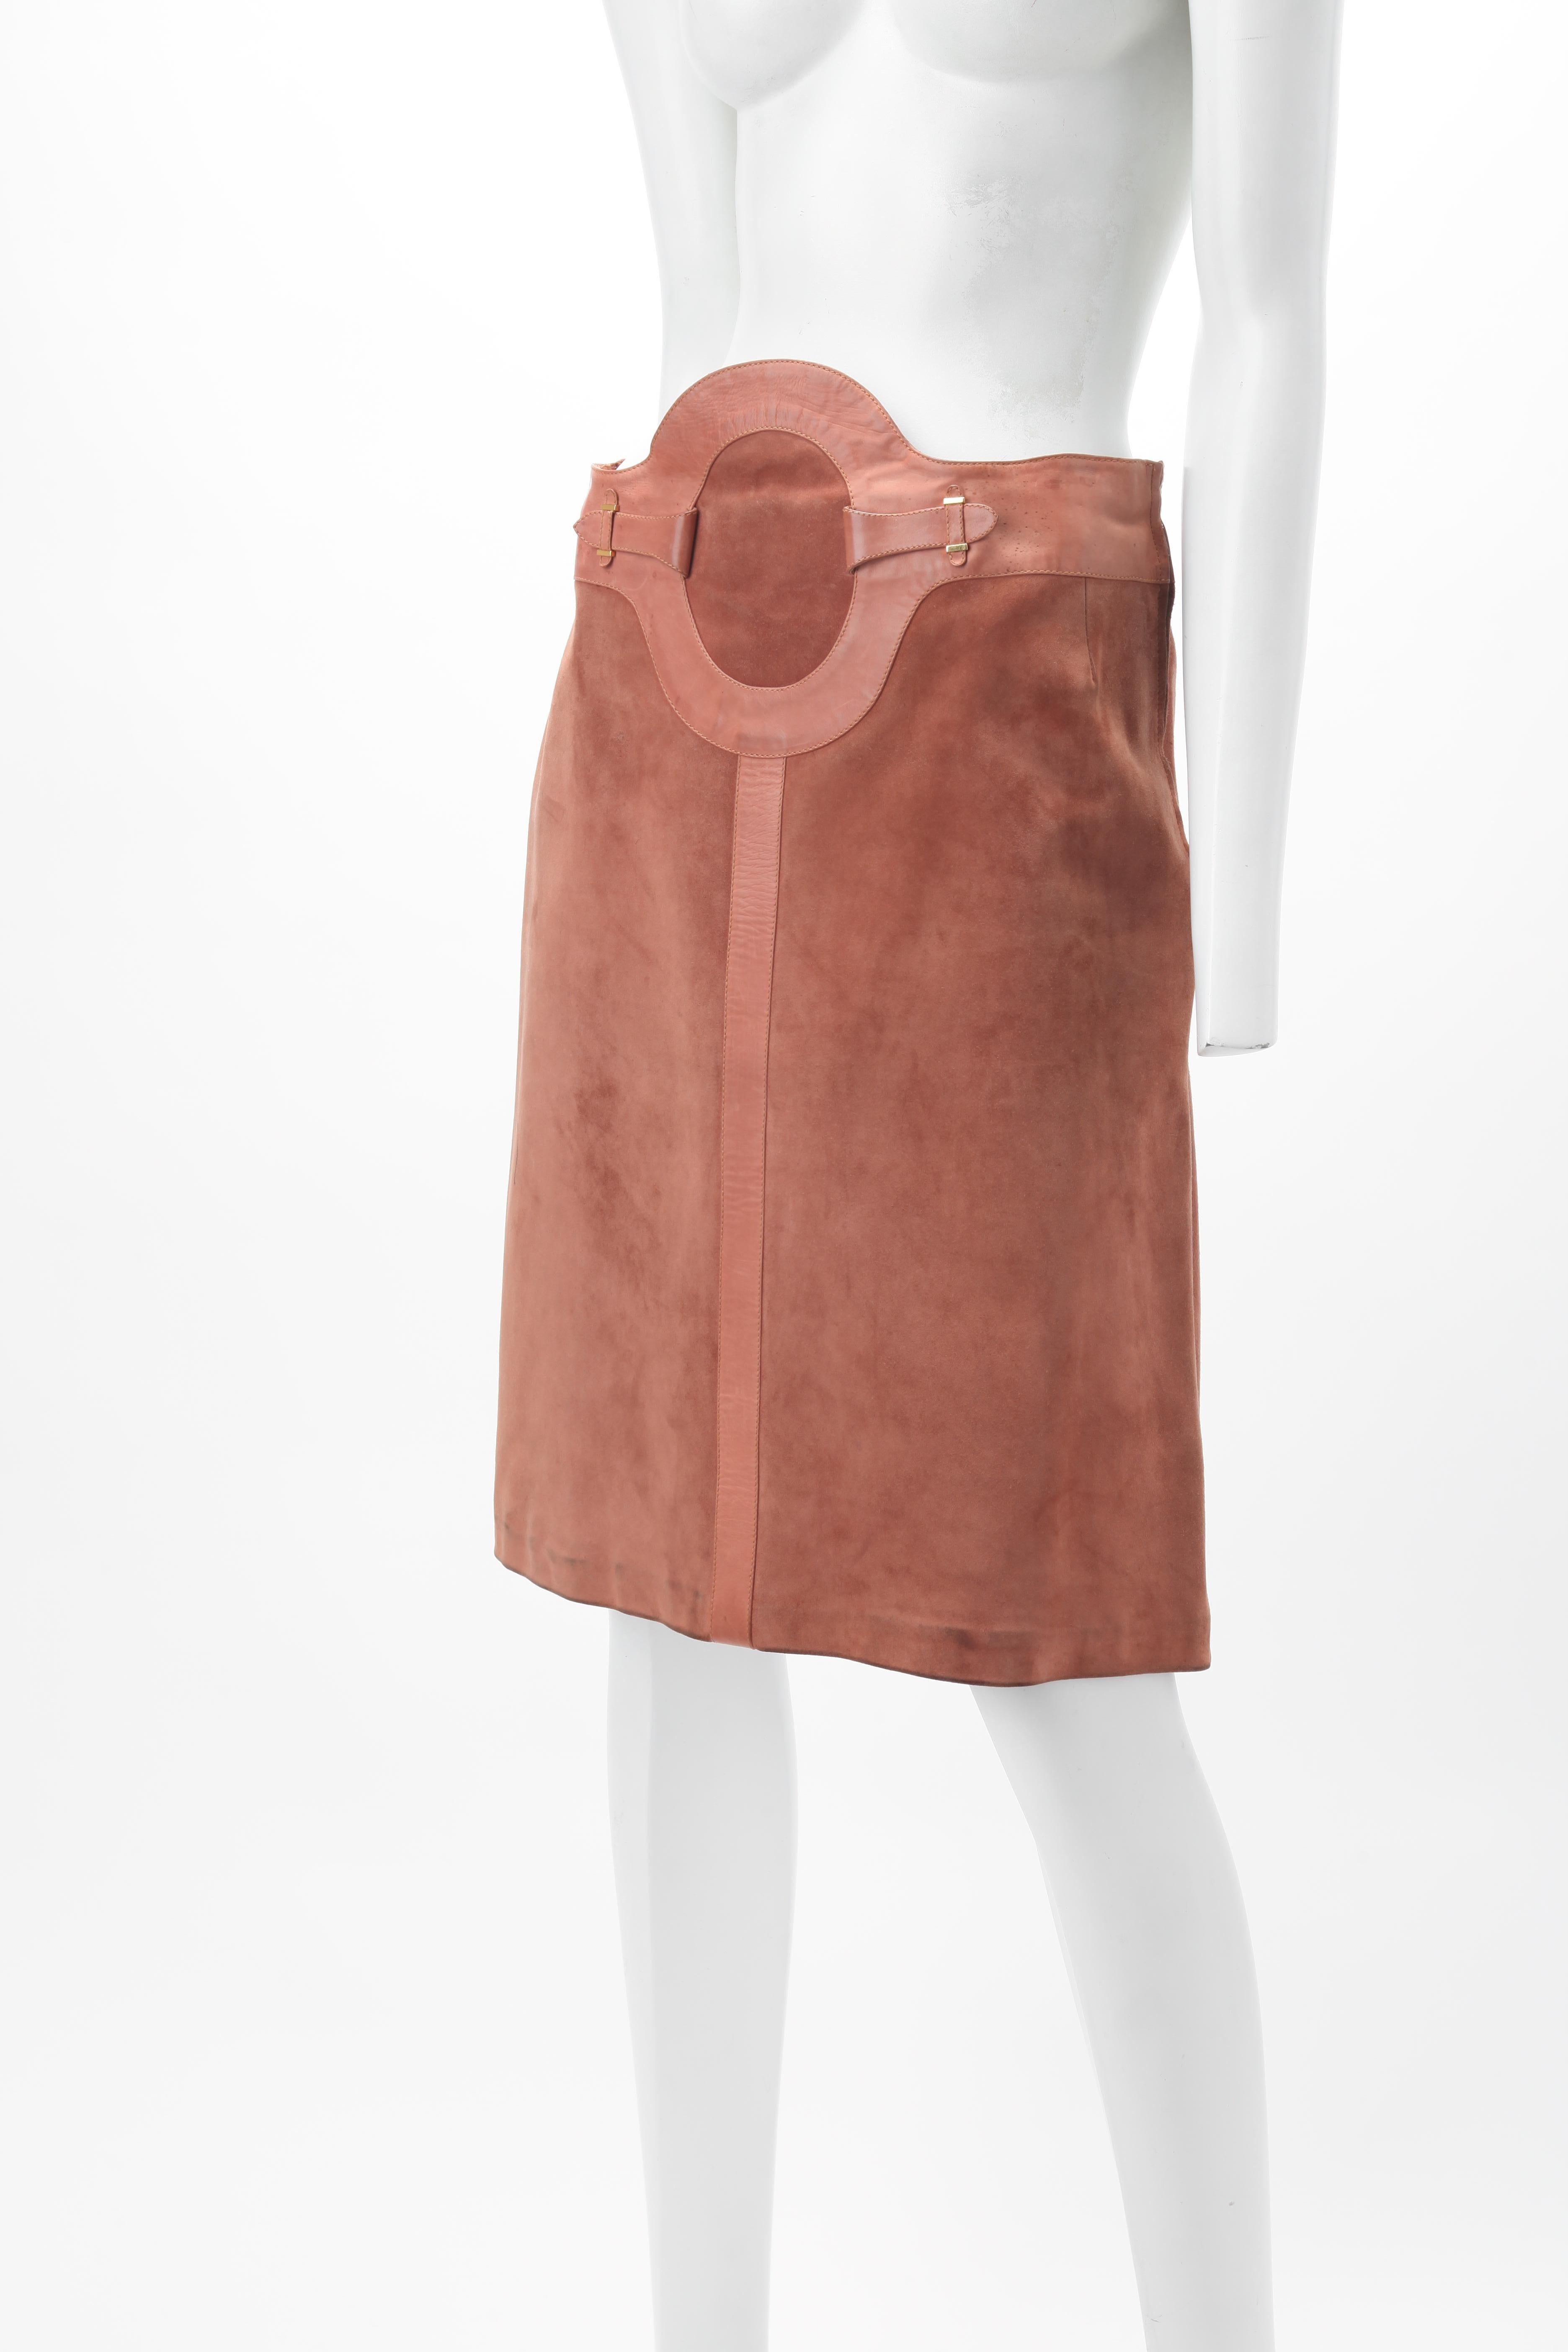 1970s GUCCI Archival Camel Suede A-Line Skirt; Knee Length skirt with oval leather trim and gold metal buckle hardware; Side zipper closure; Fully lined with signature 